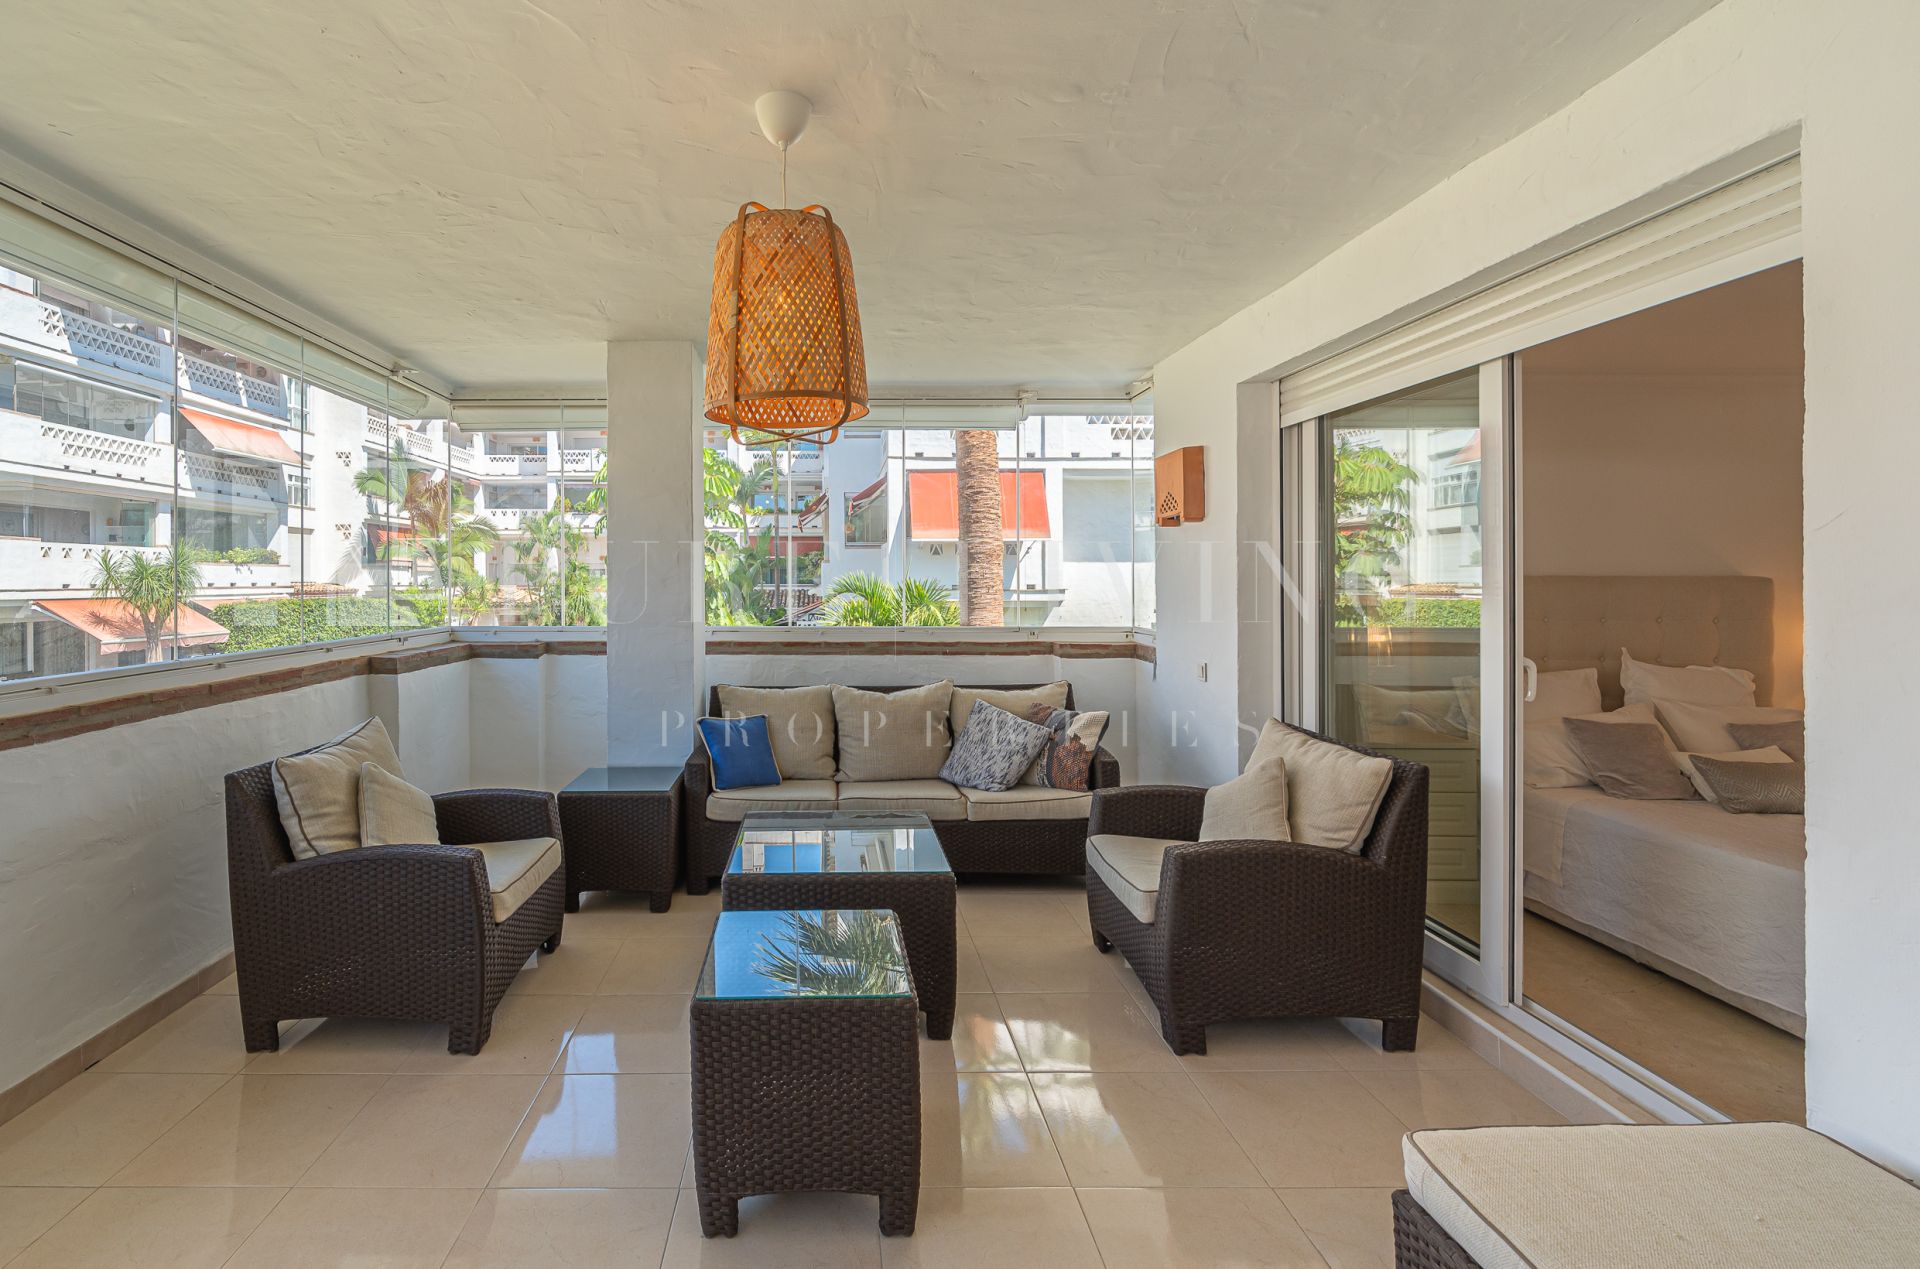 Three bedroom apartment for sale in a residential complex on the beach front.